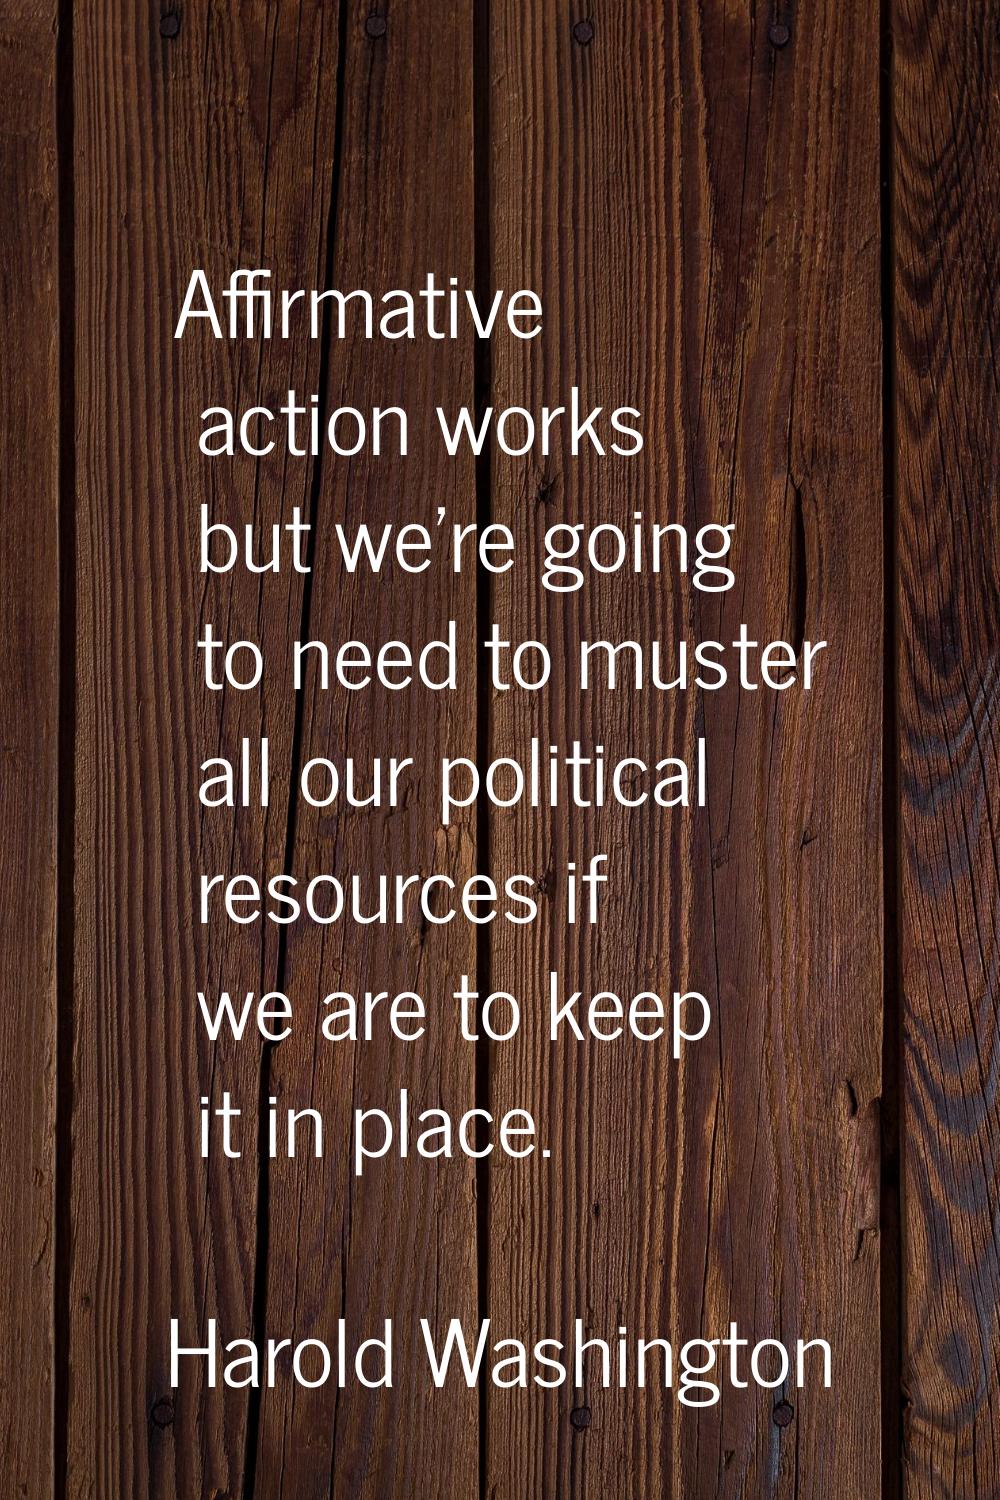 Affirmative action works but we're going to need to muster all our political resources if we are to